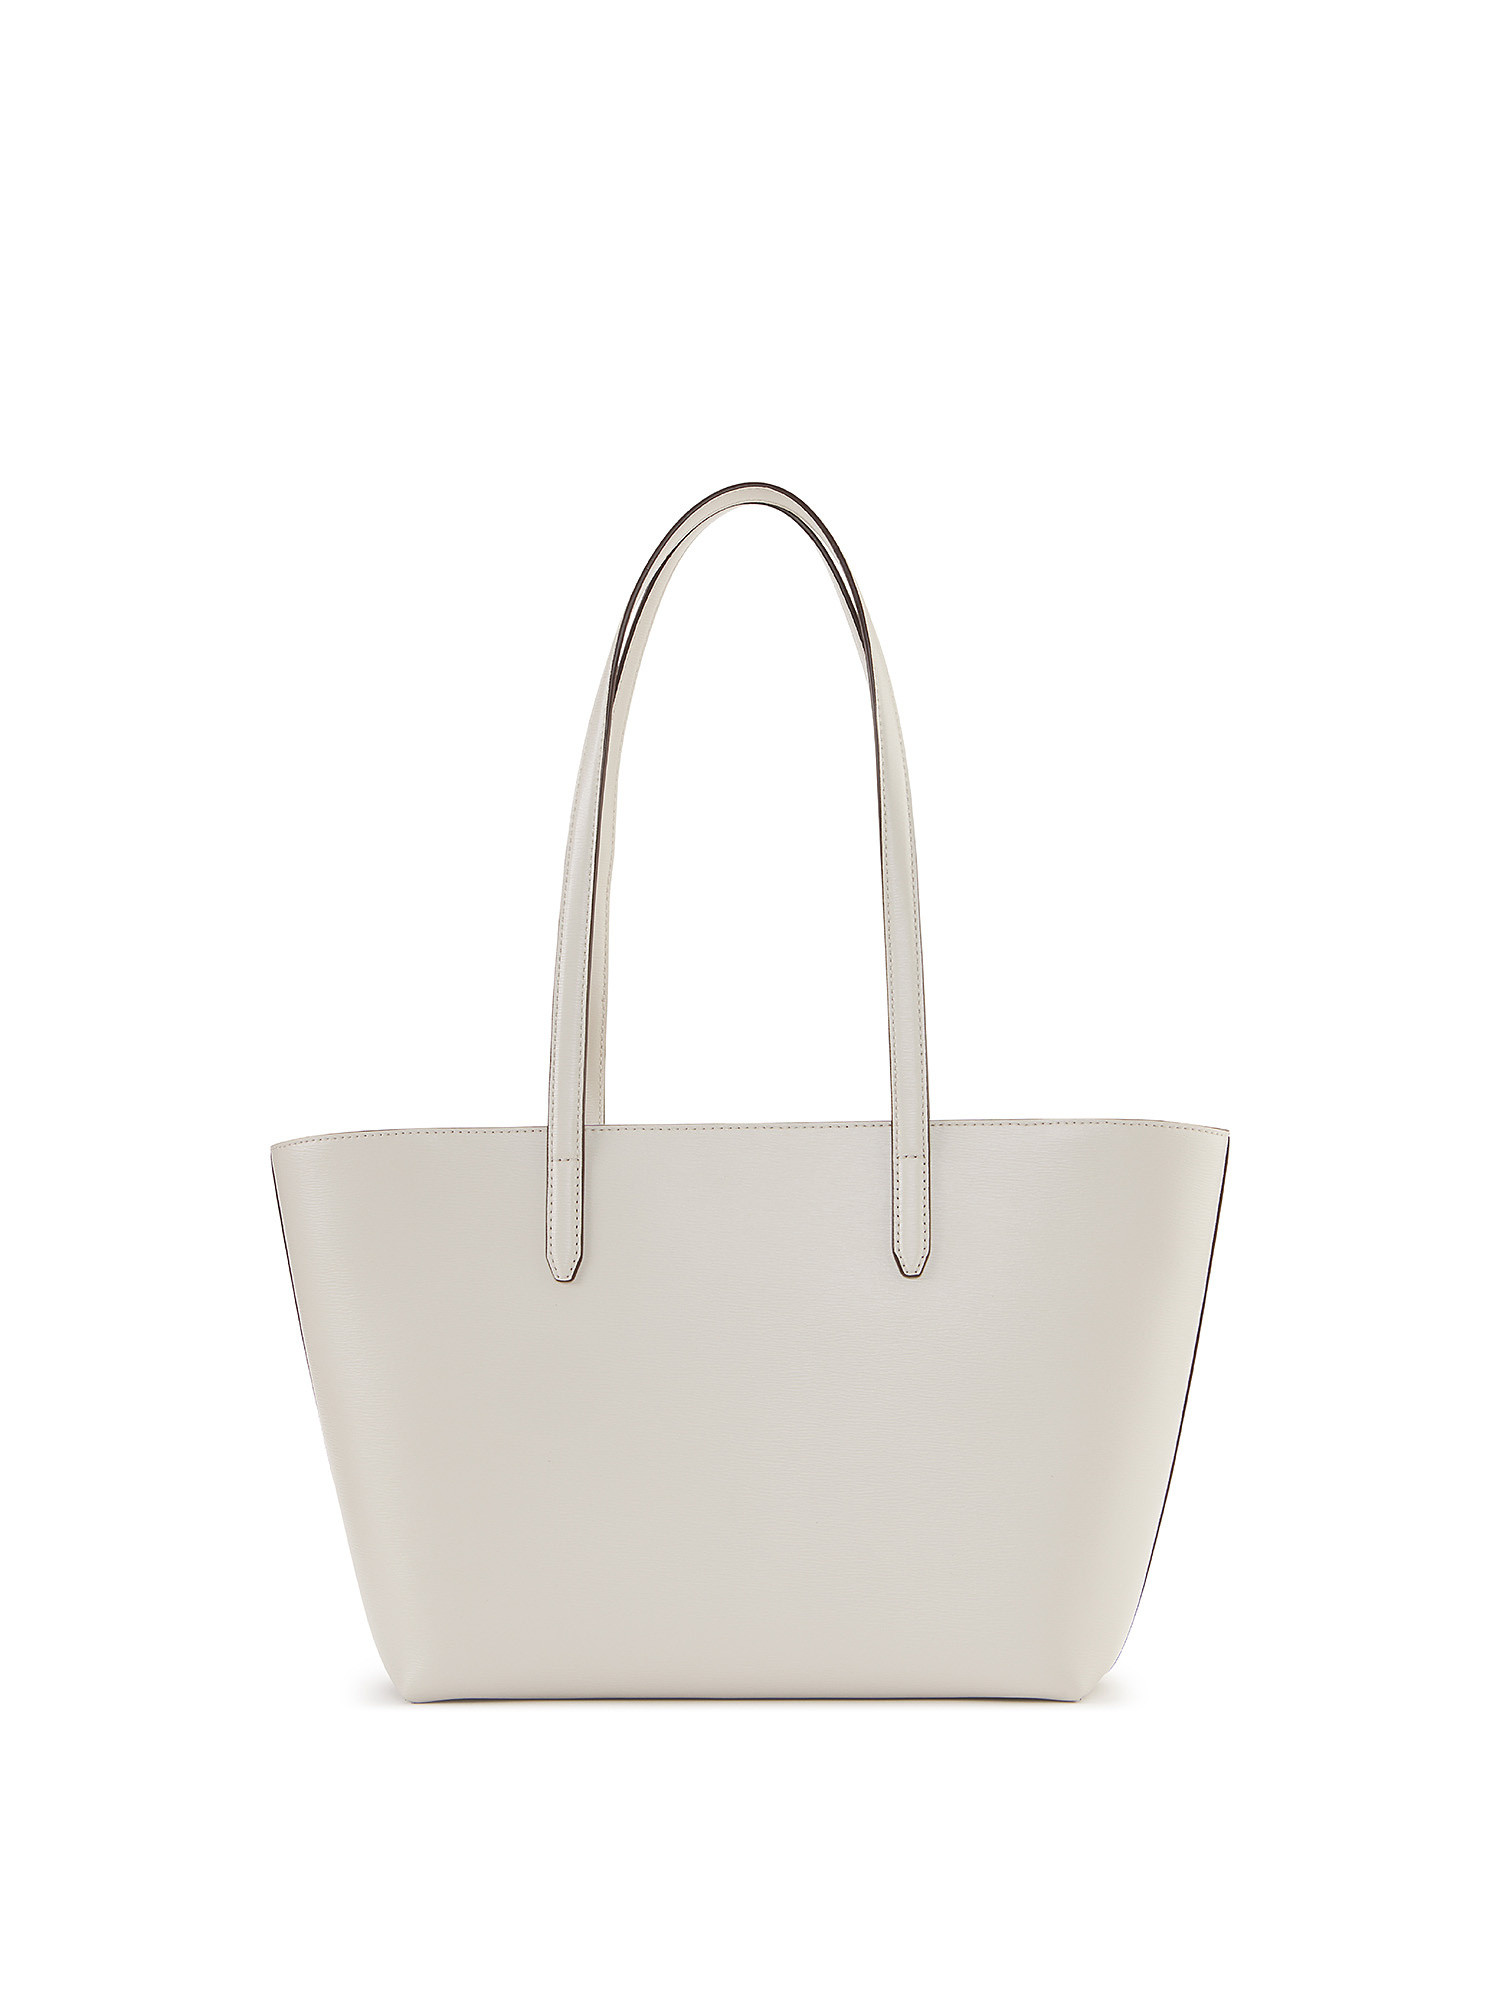 Dkny - Tote bag with removable accessory, White, large image number 1